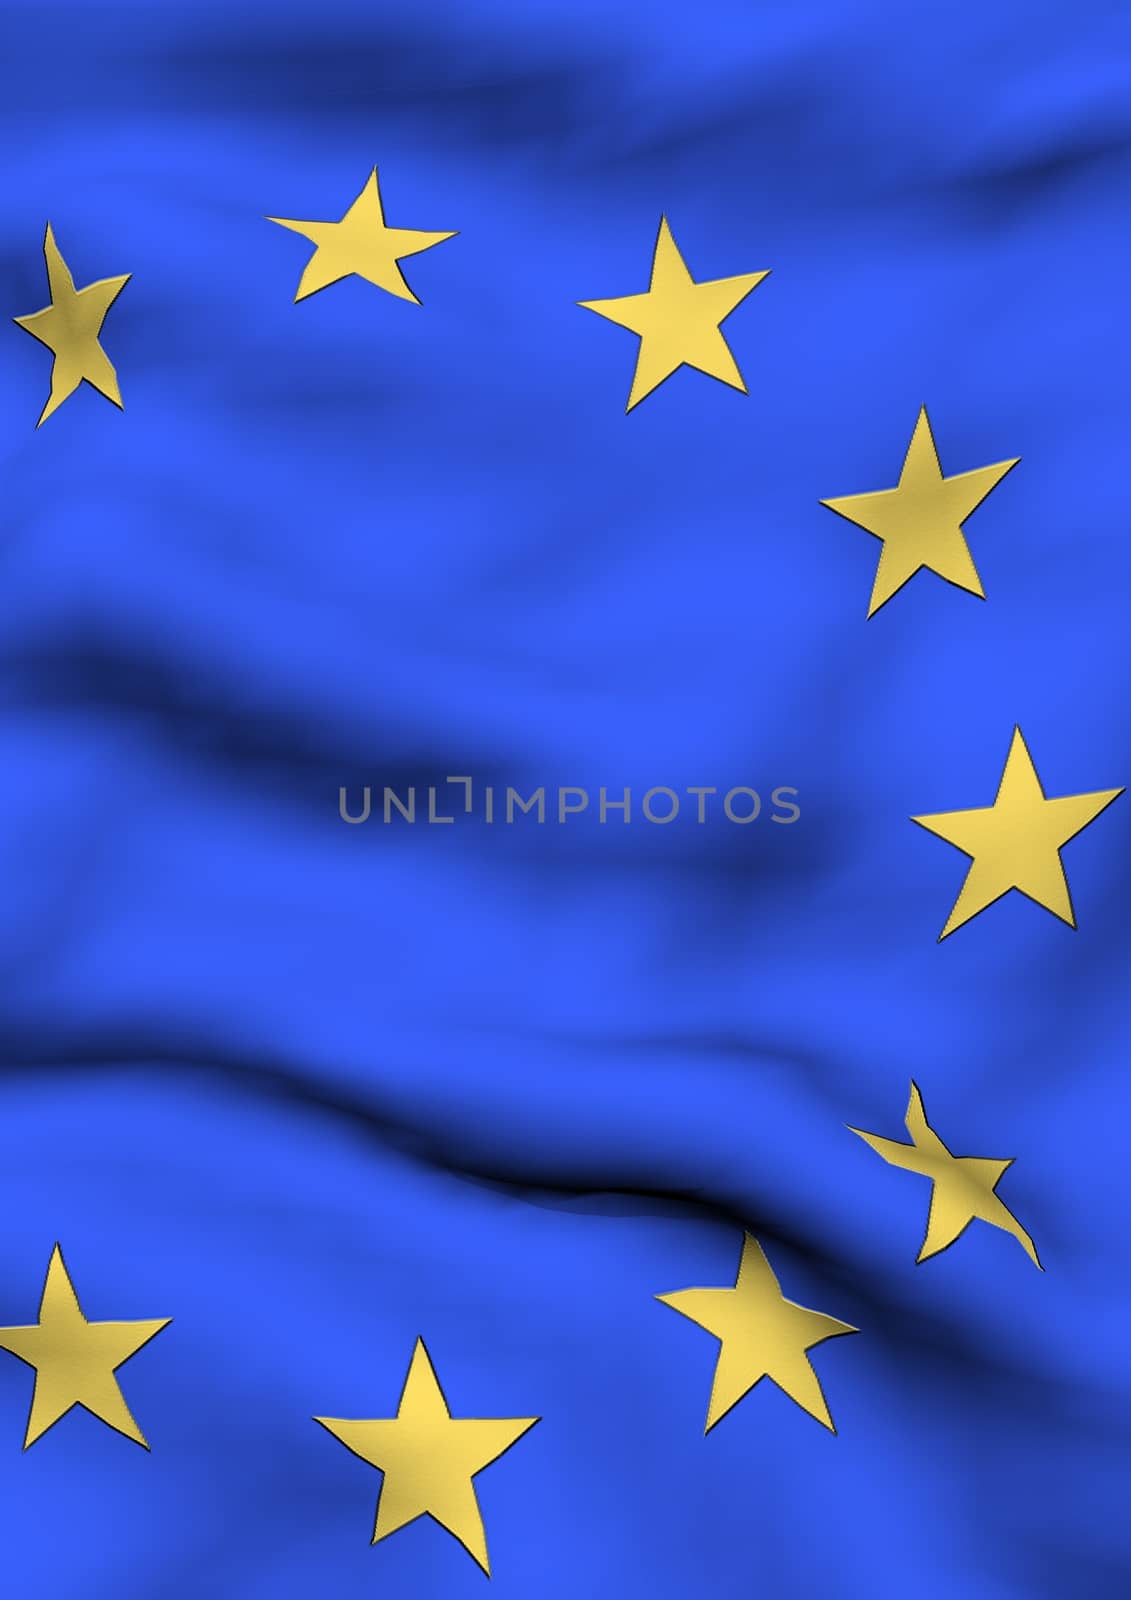 Image of a waving flag of Europe